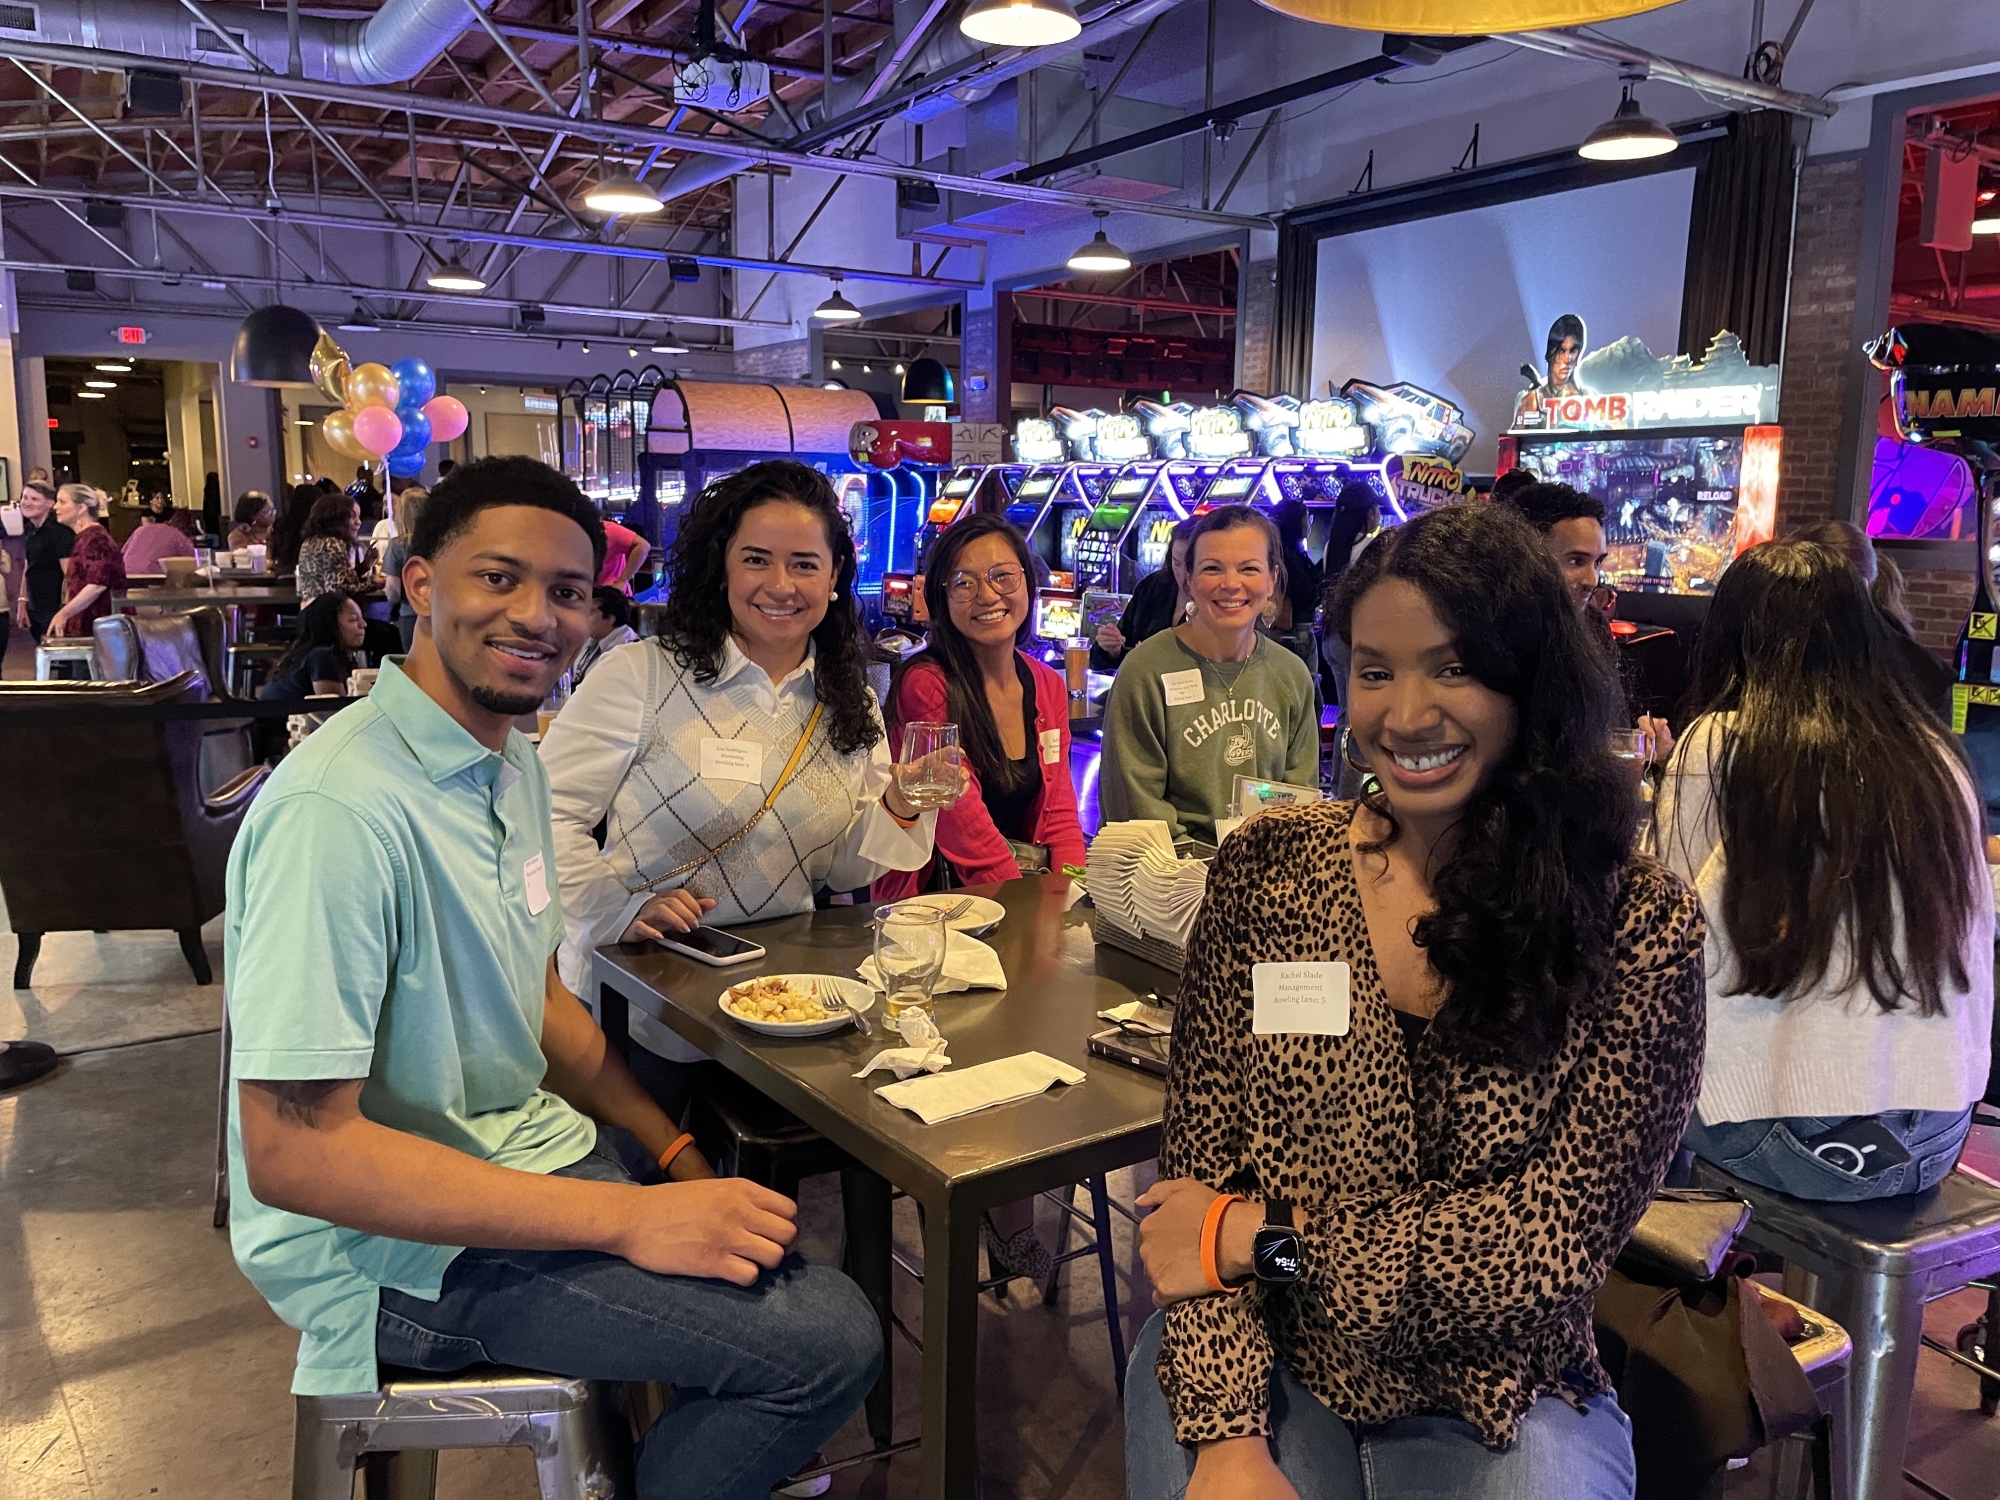 Group of MBA students at a networking event